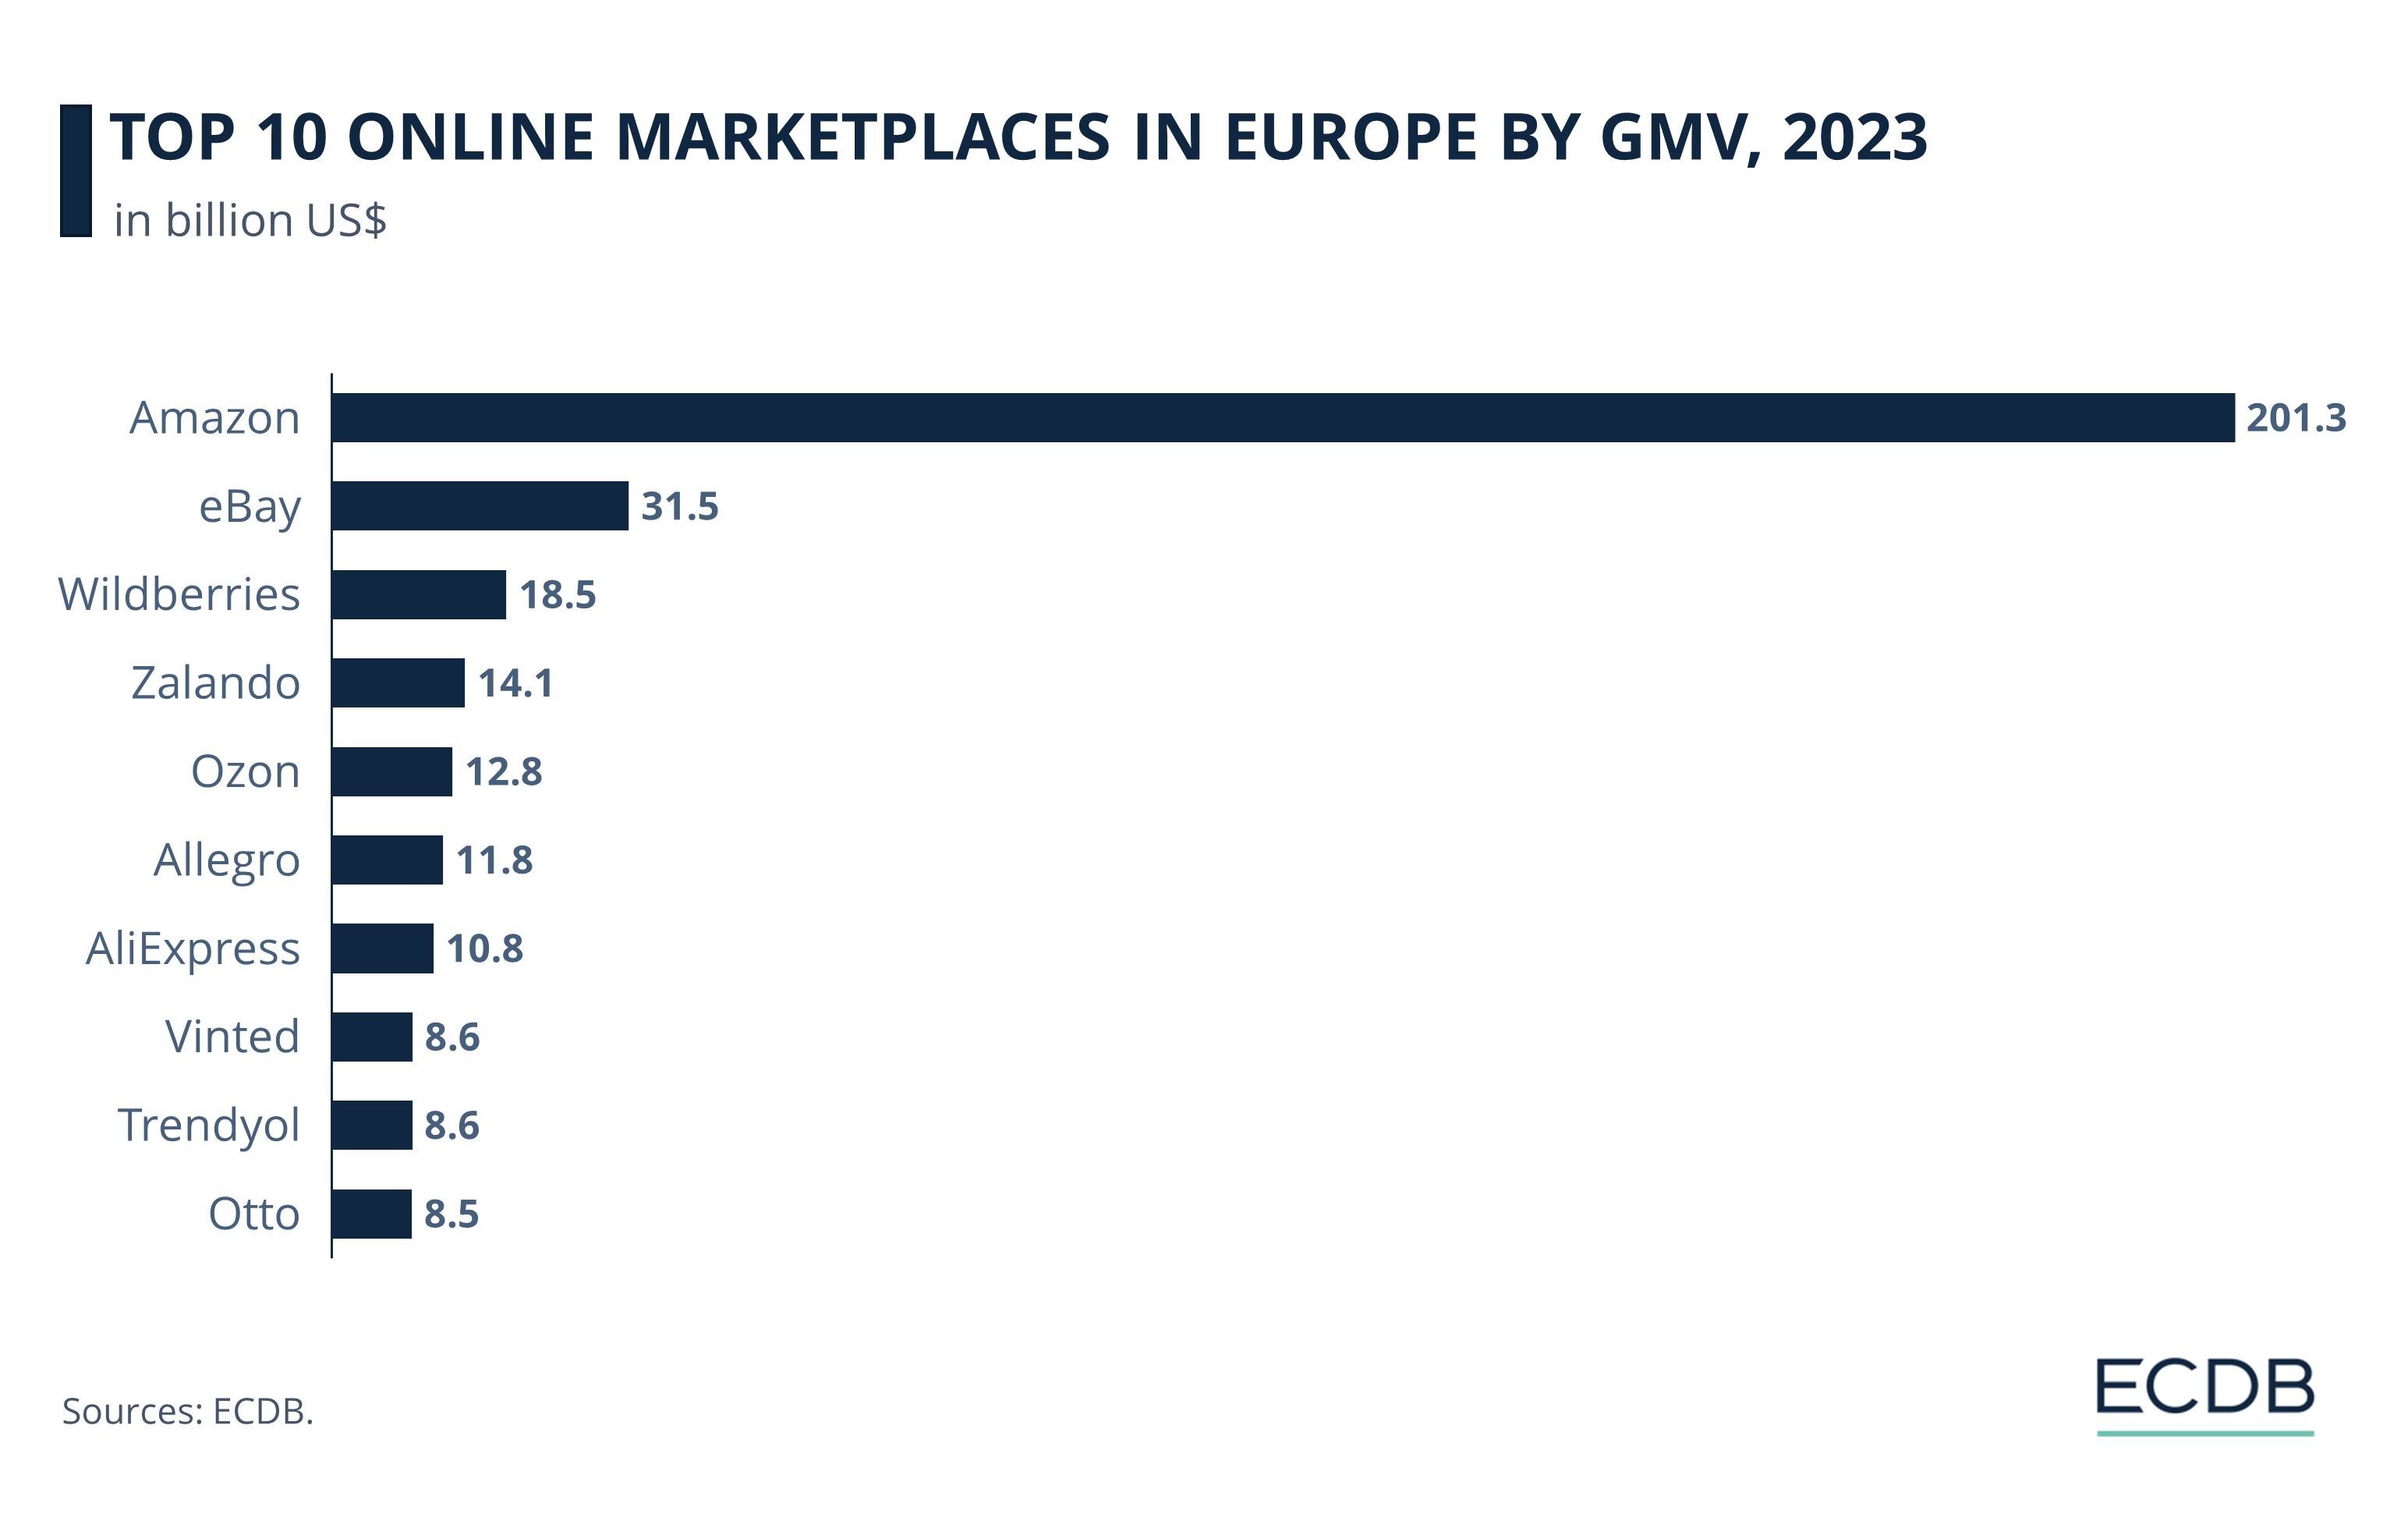 Top 10 Online Marketplaces in Europe by GMV, 2023